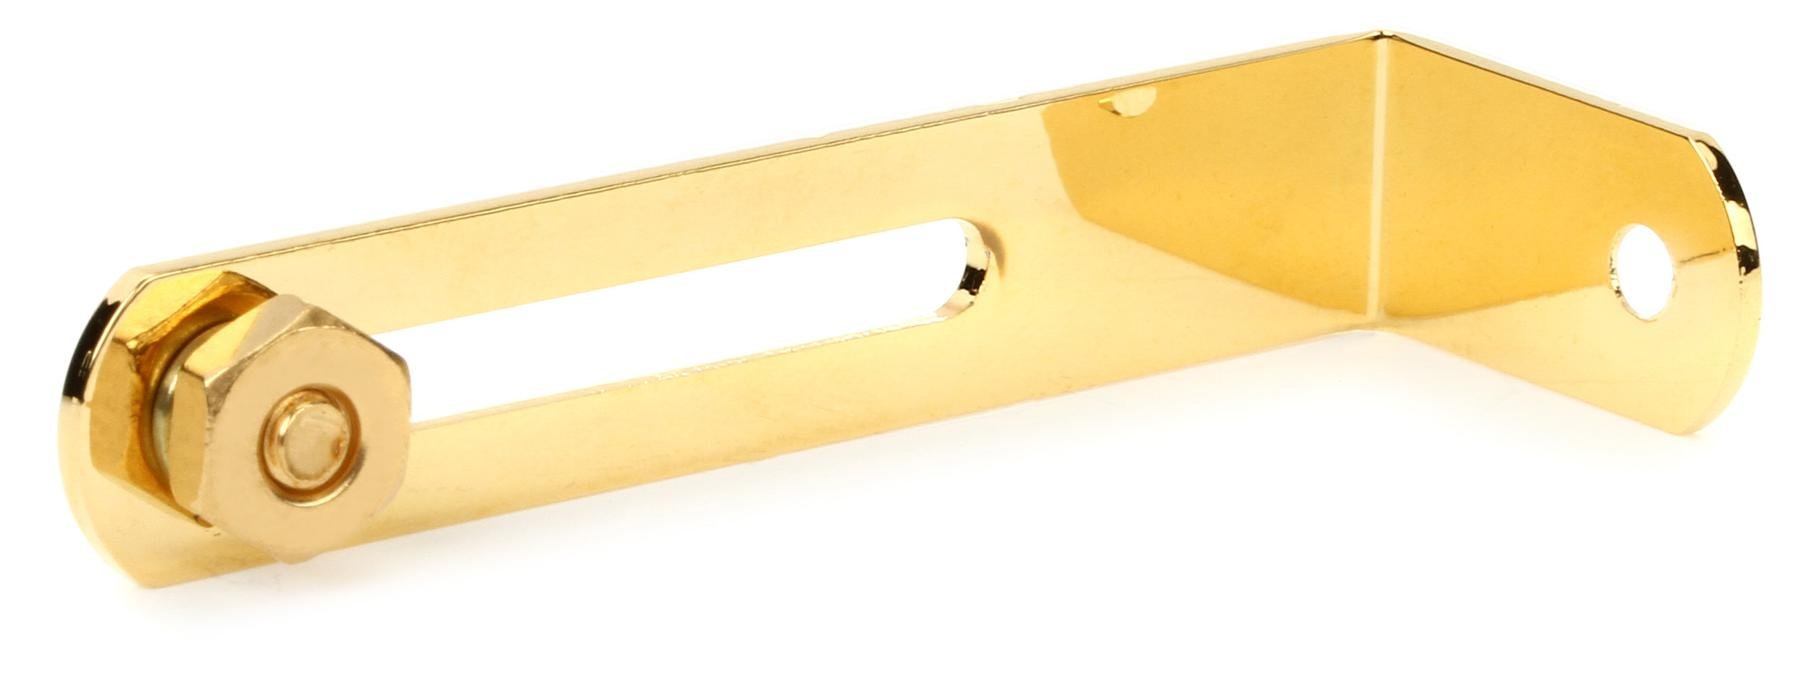 Gibson Accessories Pickguard Mounting Bracket for Les Paul - Gold 